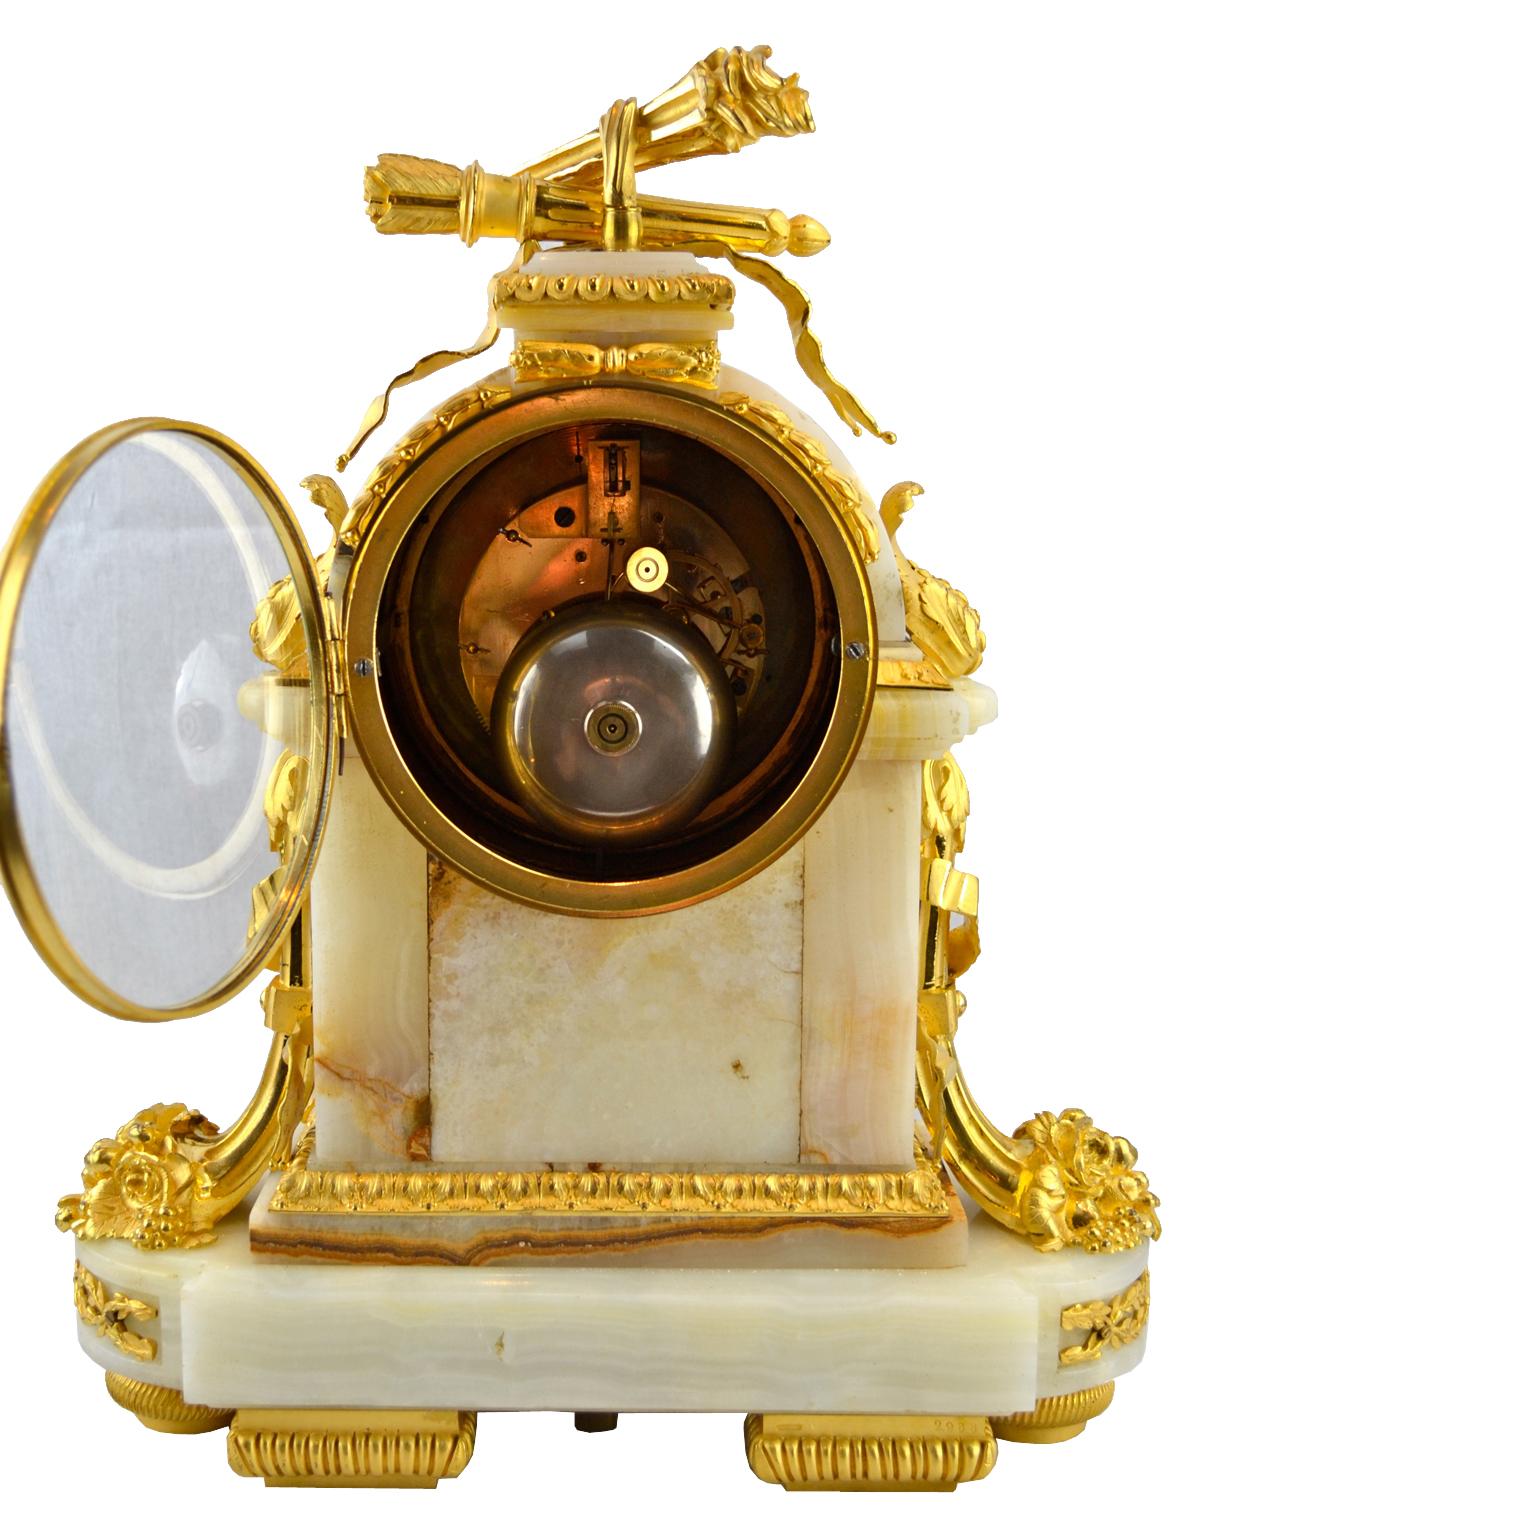 Hand-Carved French 19 Century Louis XVI-Style Ormolu and Onyx Clock by Raingo Freres